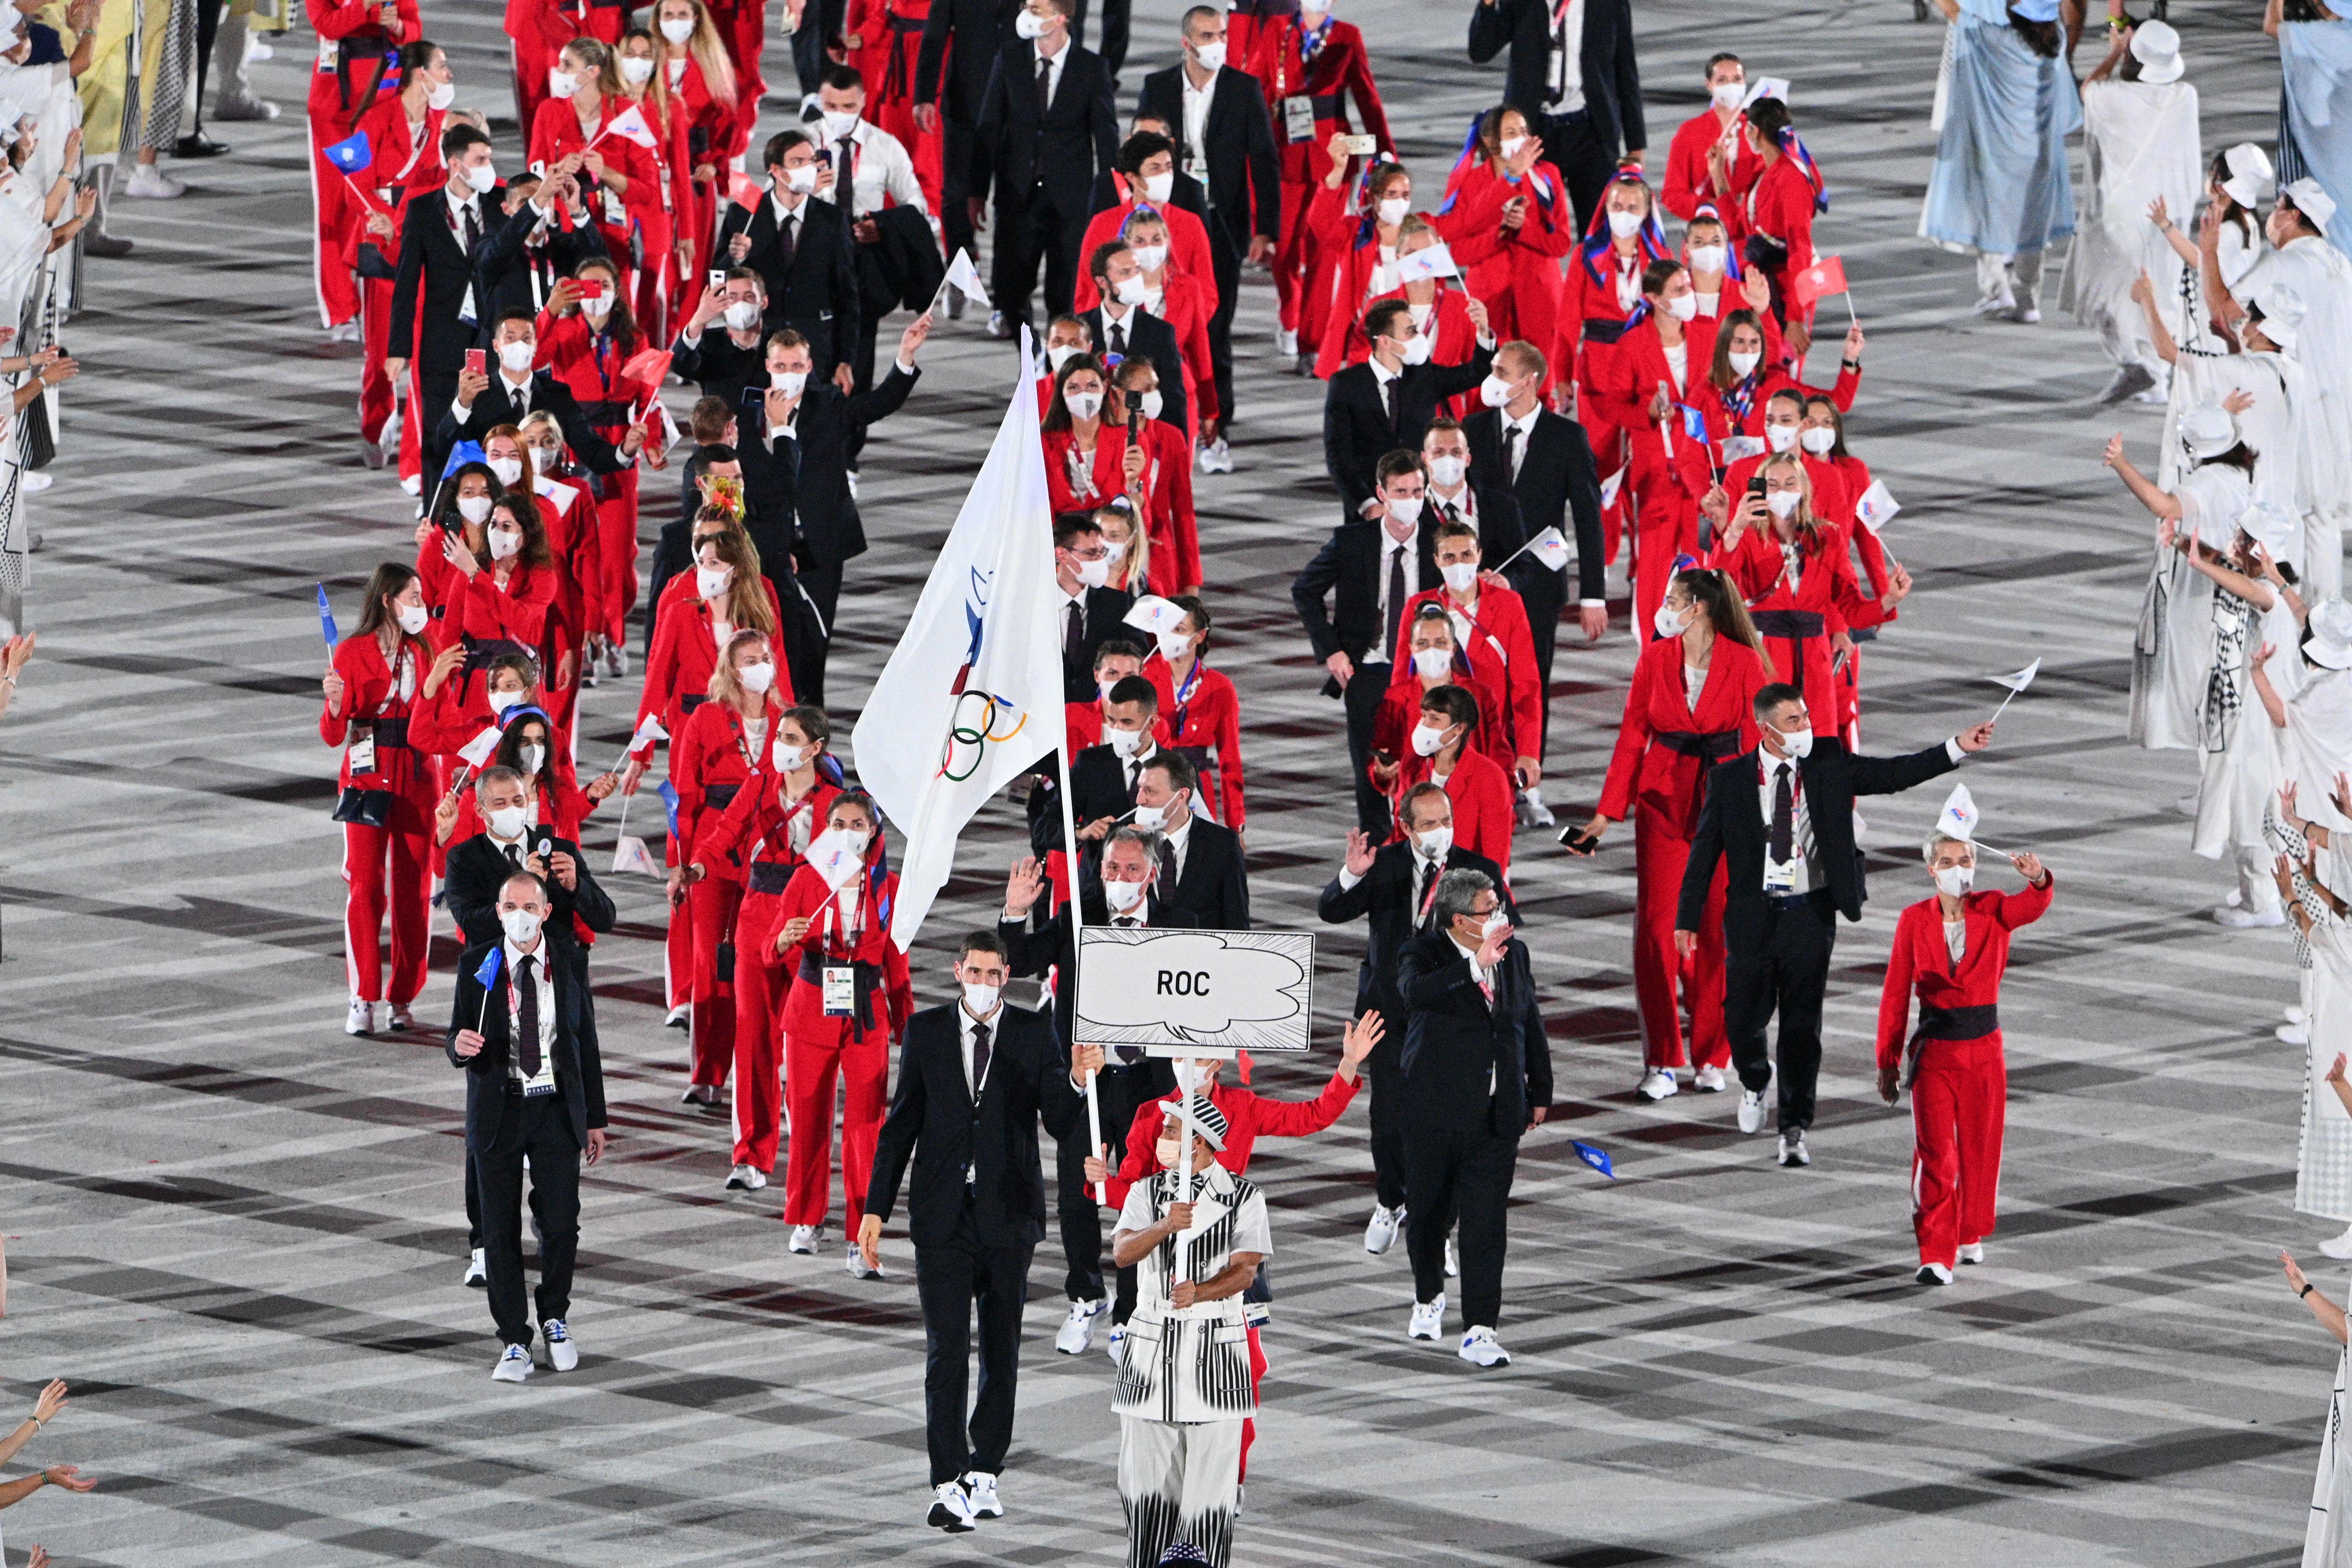 A large group of Russian athletes wearing red and black march in the Olympic stadium